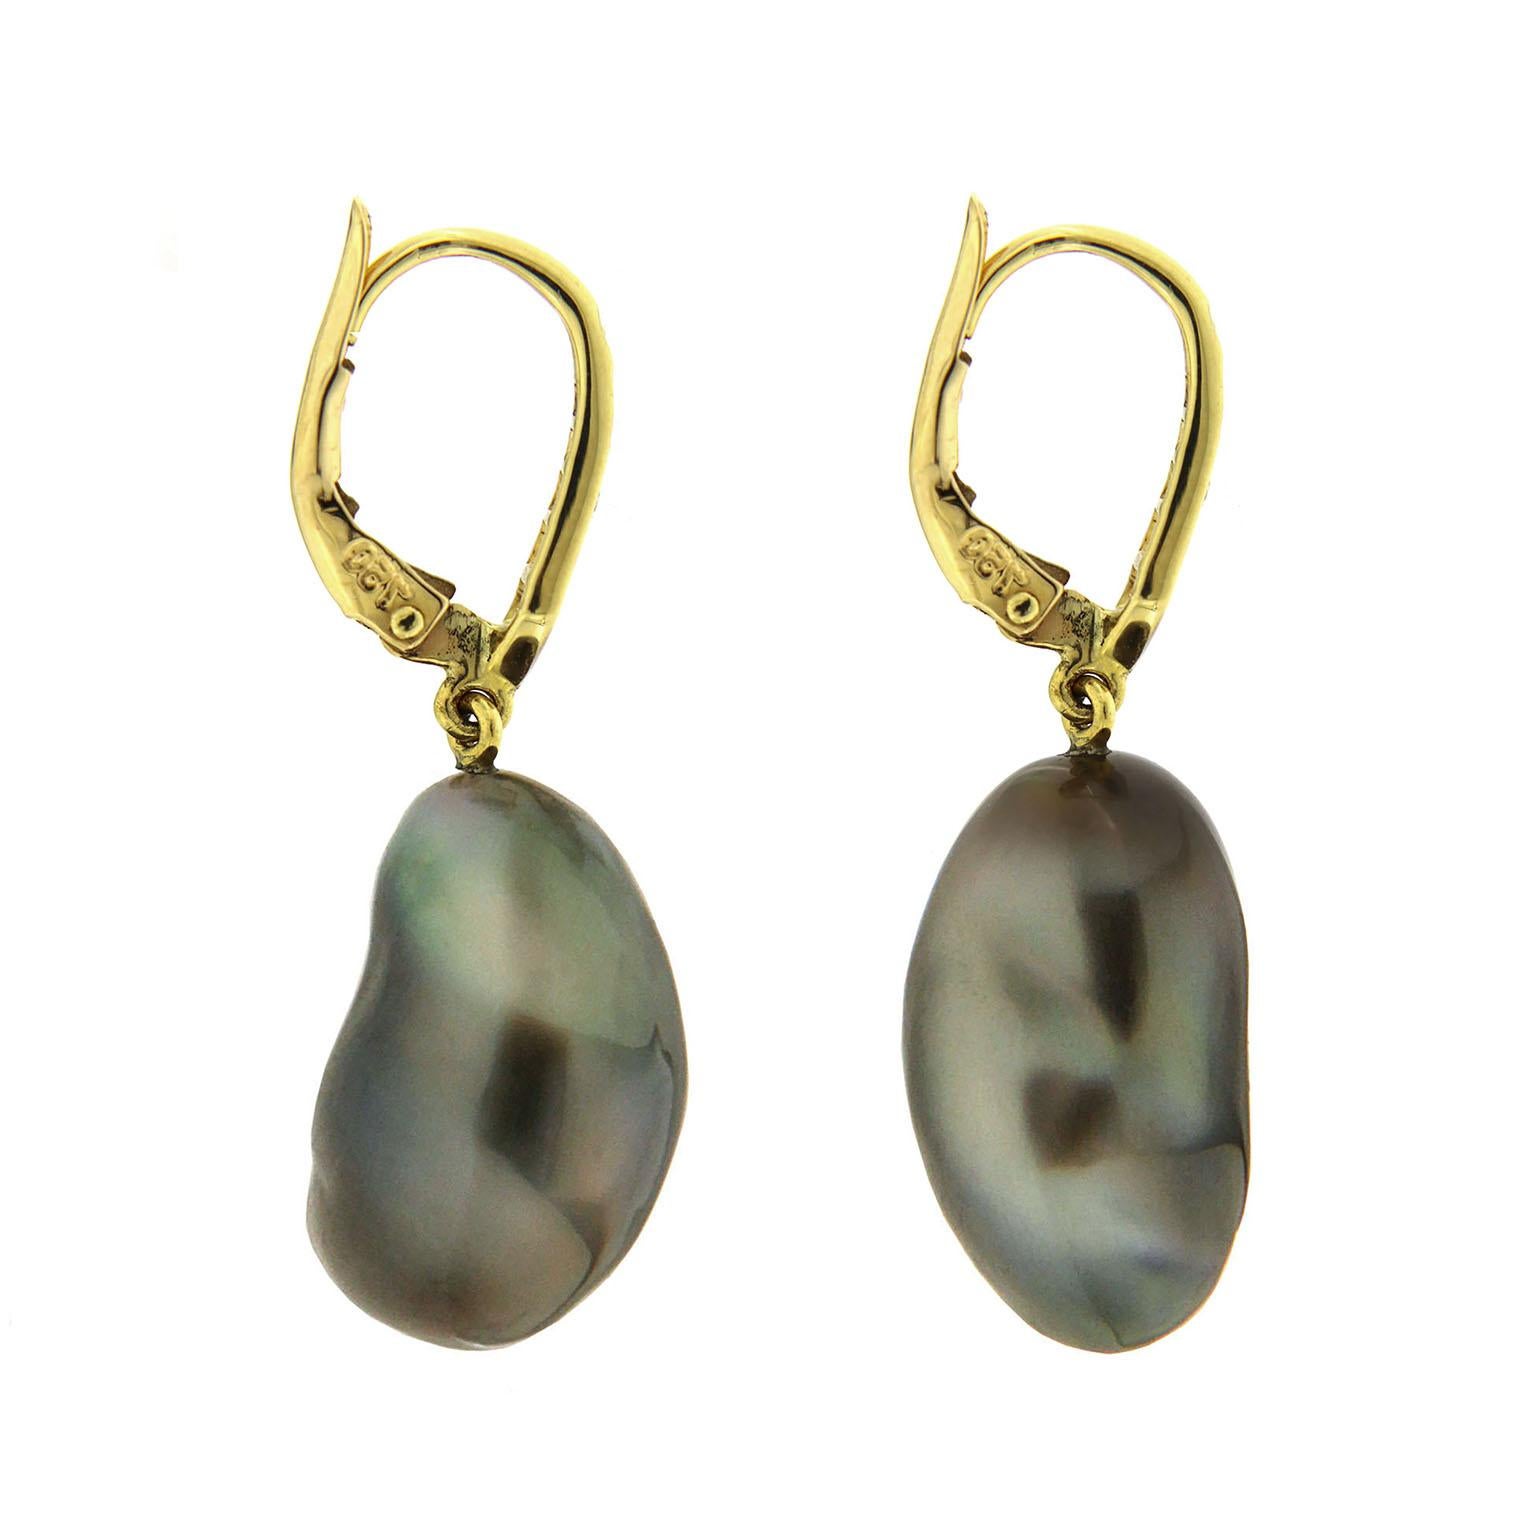 Valentin Magro Baroque Tahitian Pearl Tear Drop Diamond Earrings exhibit strong gleam. Their dark body color makes white light reflections all the more prominent. Additional light scatters along the baroque pearls’ surfaces, creating purple and blue